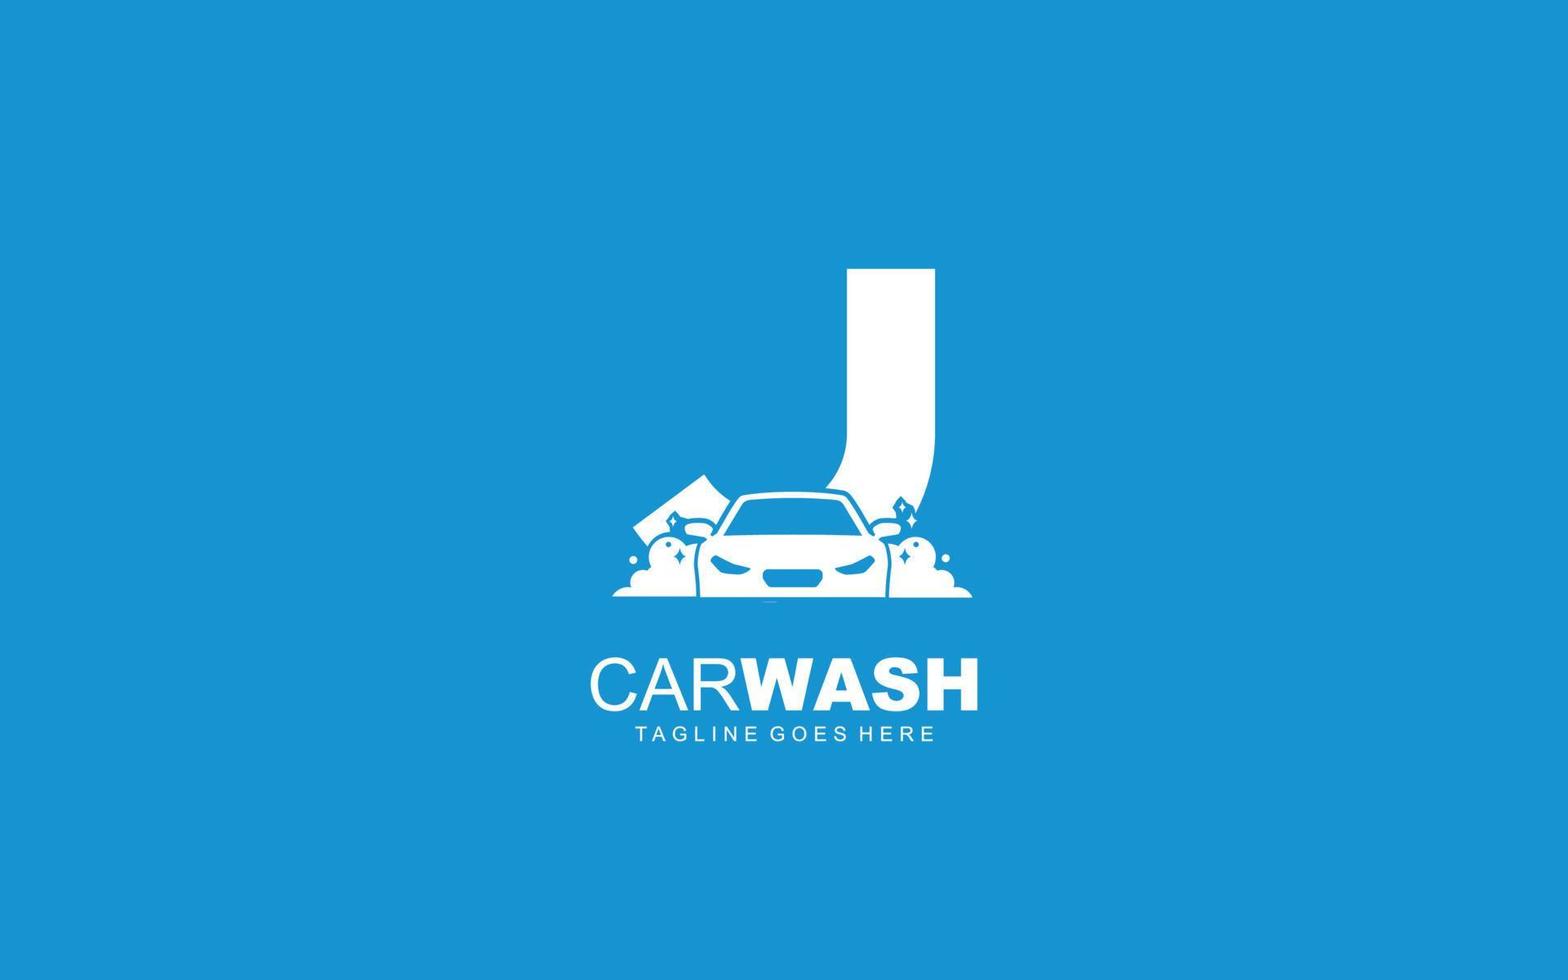 J logo carwash for identity. car template vector illustration for your brand.